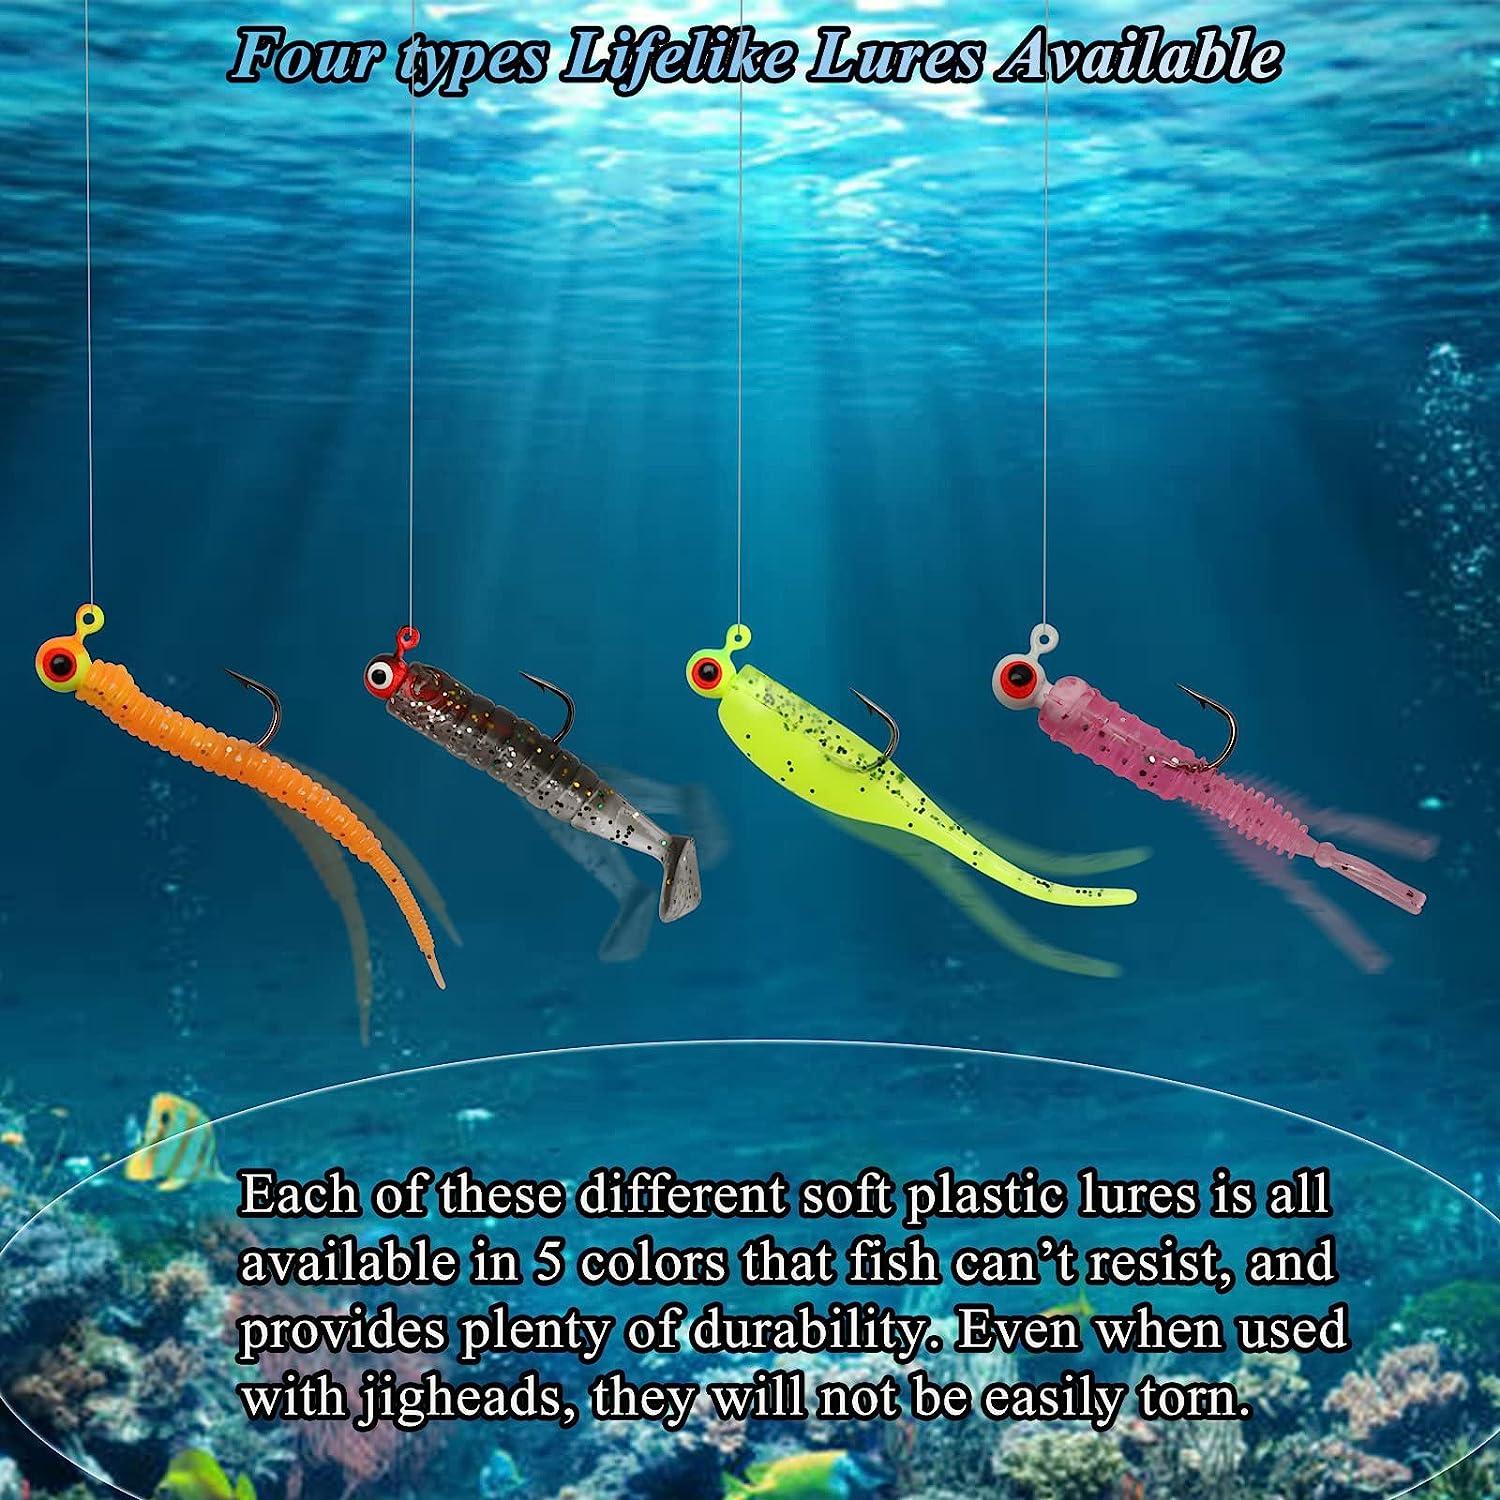 bait plastic worms_7, bait plastic worms_7 Suppliers and Manufacturers at